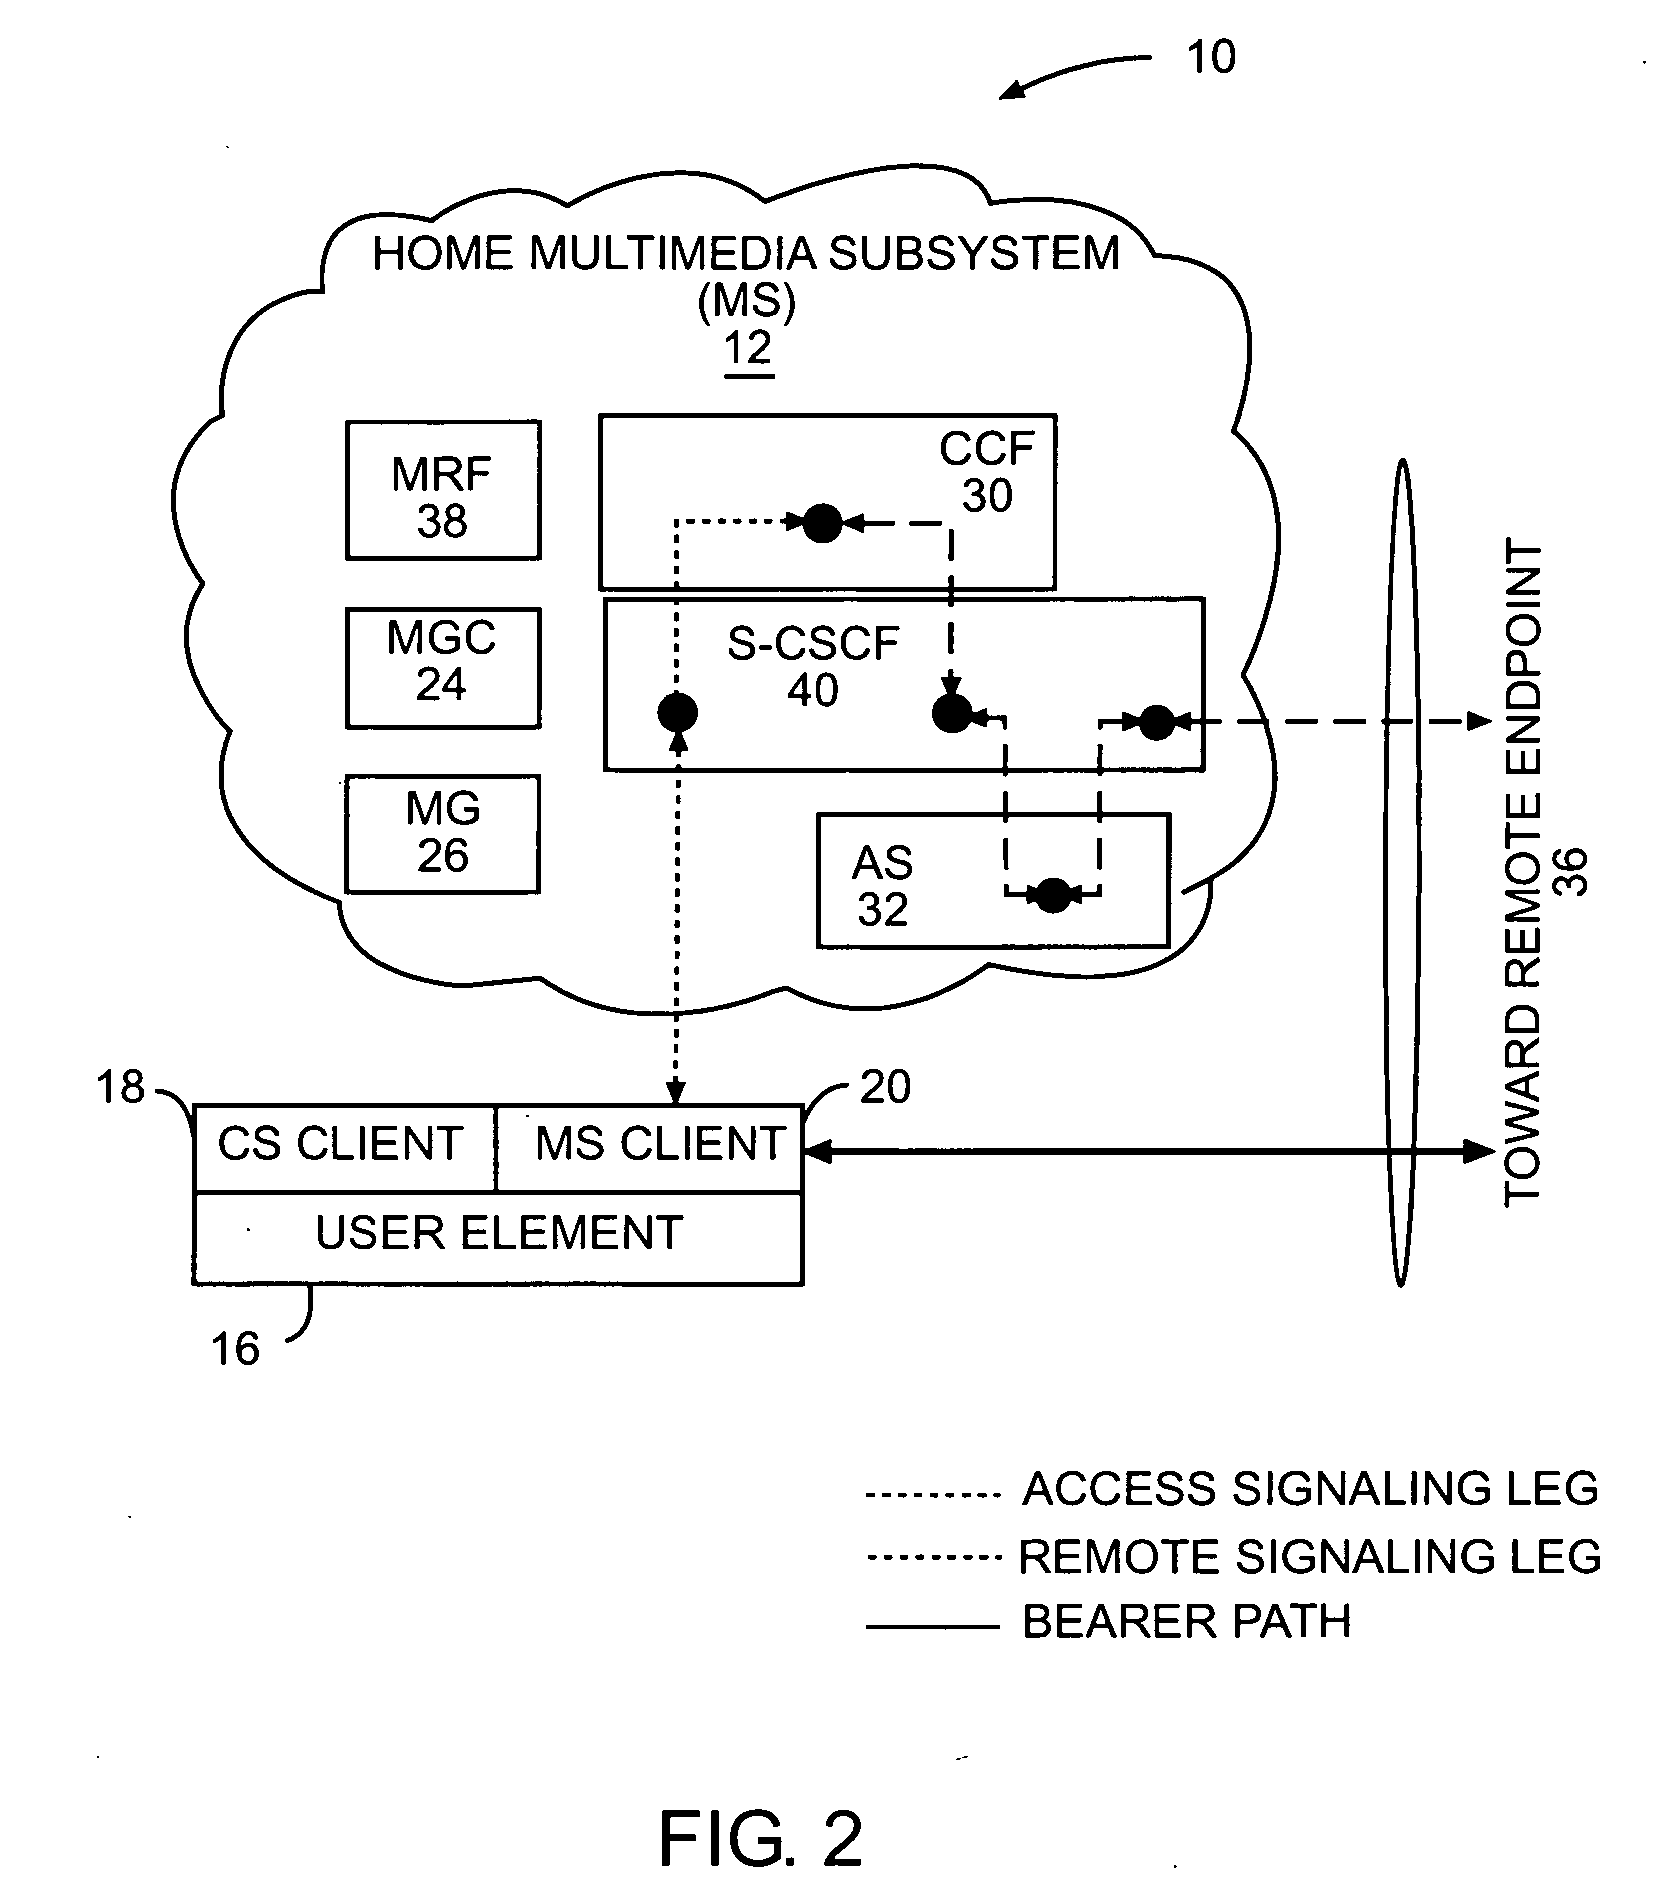 Circuit-switched and multimedia subsystem voice continuity with bearer path interruption